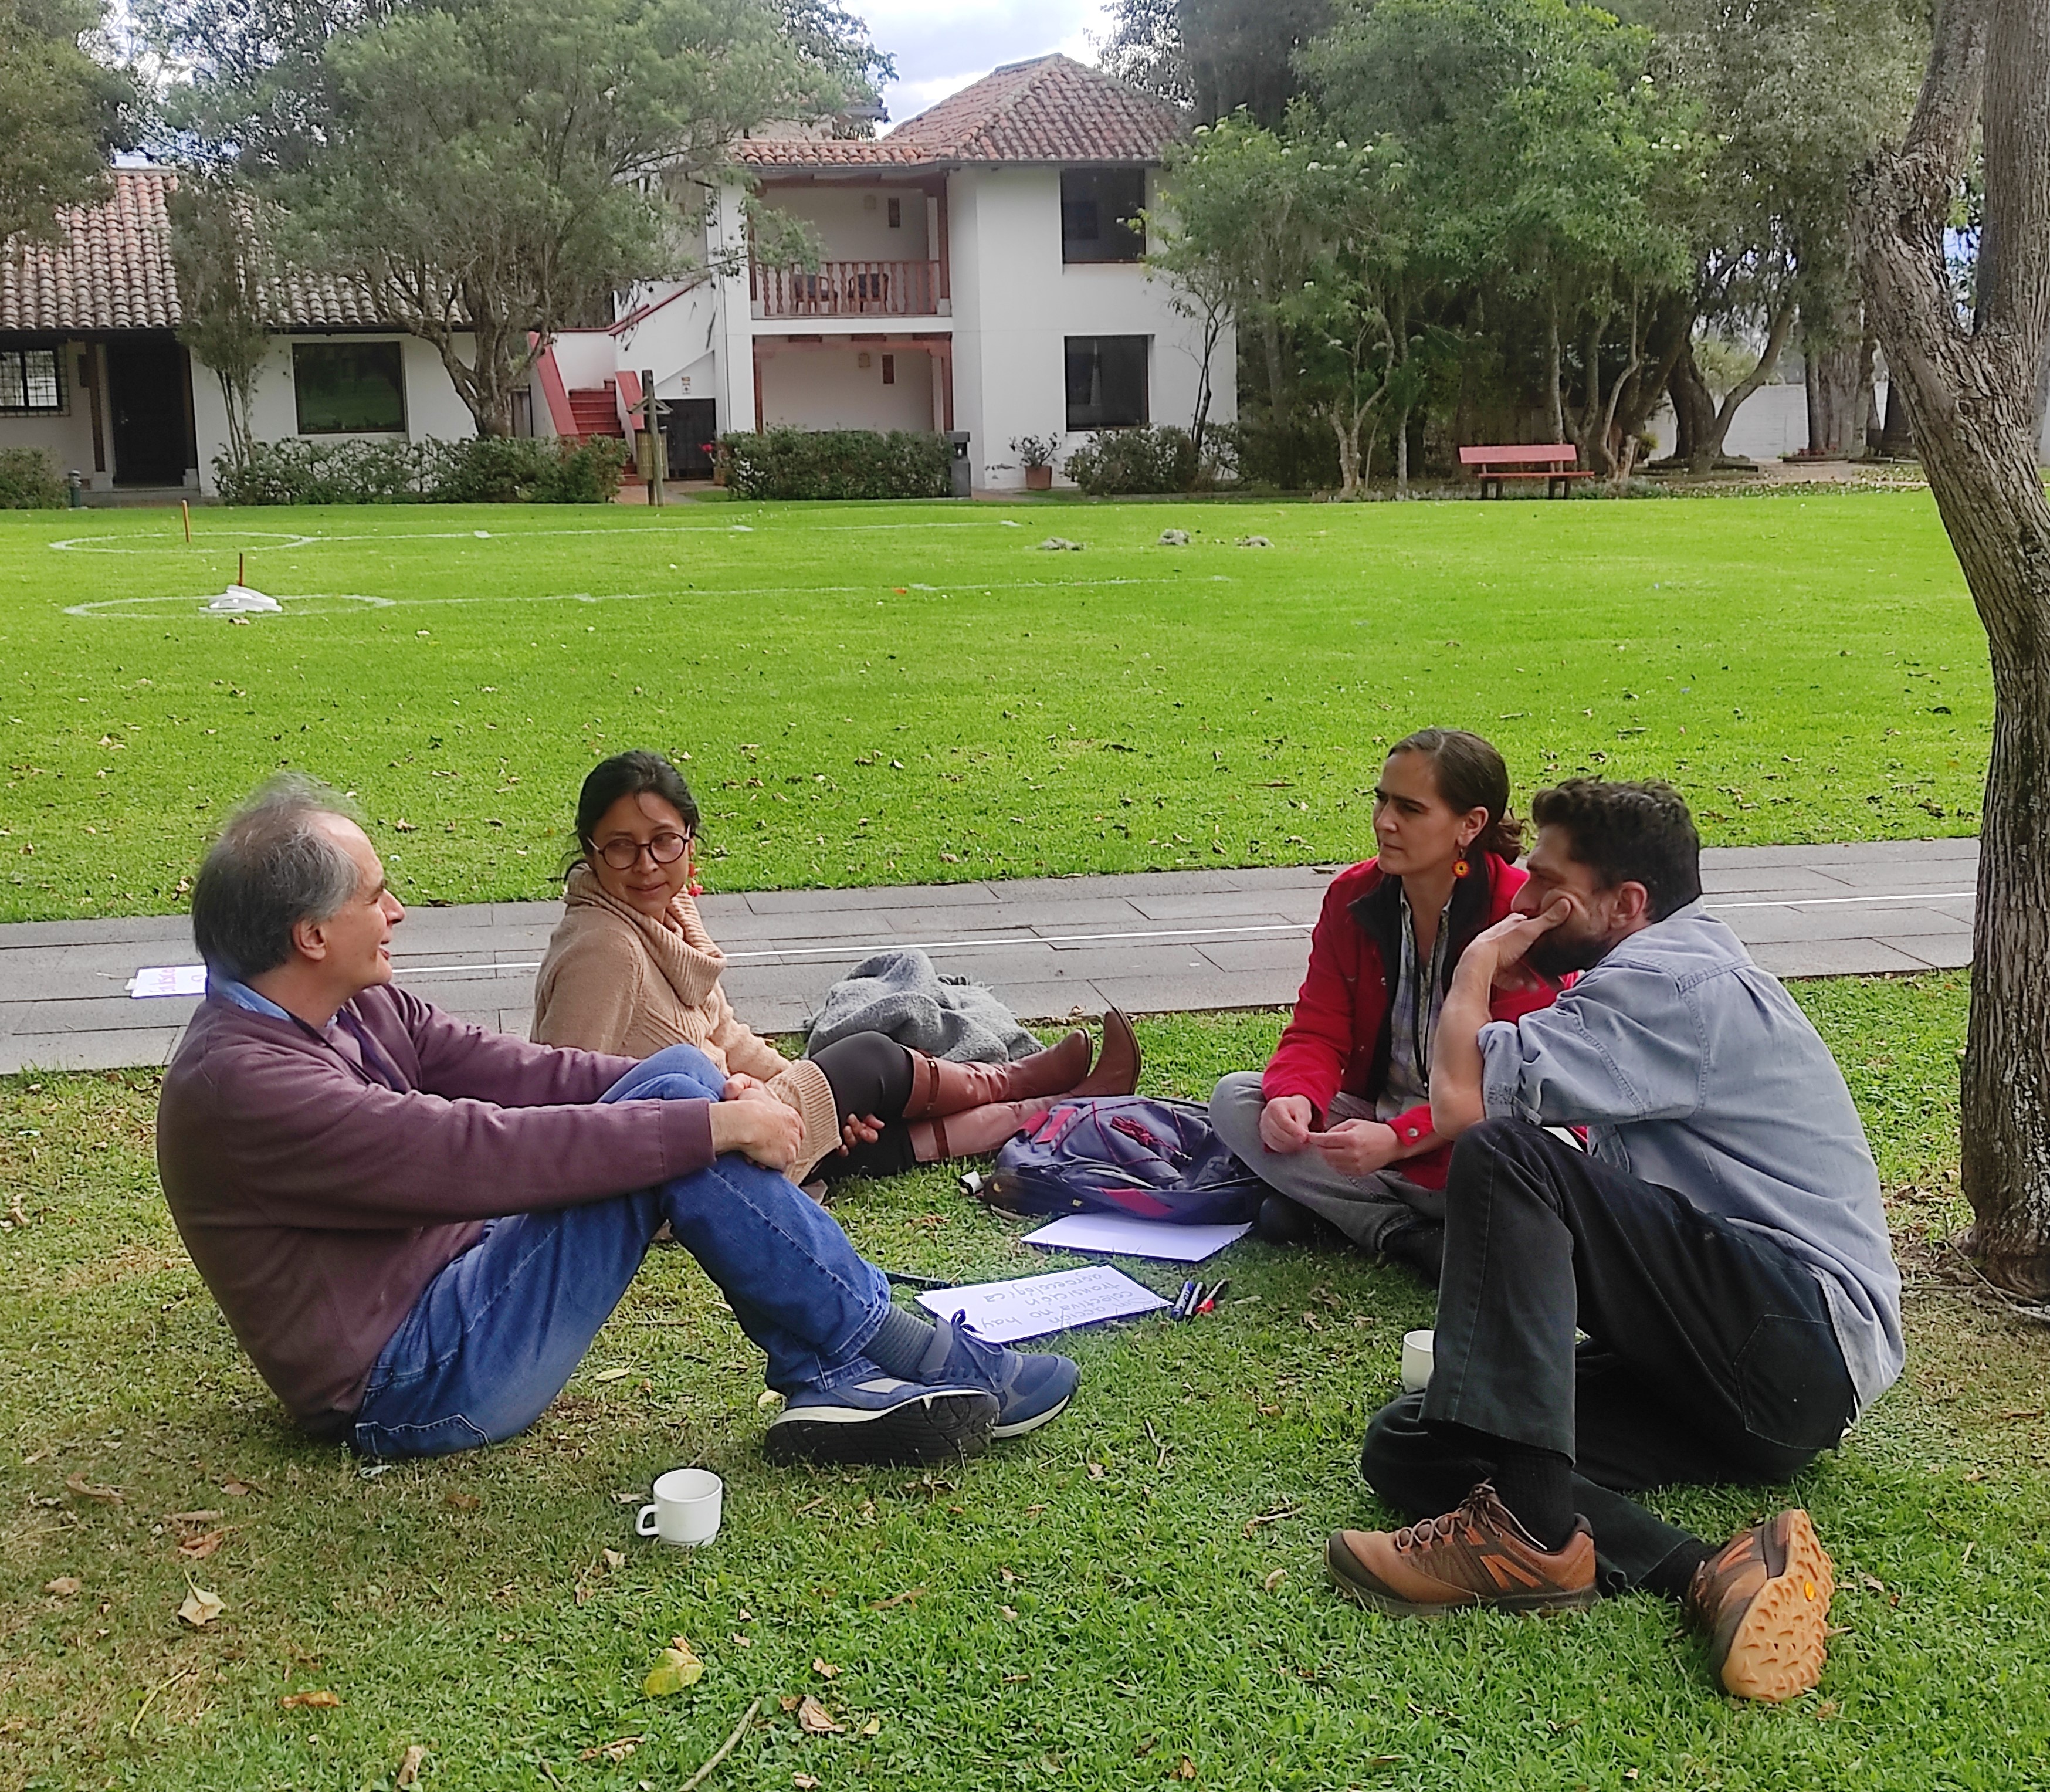 A small group having a discussion seated on the lawn